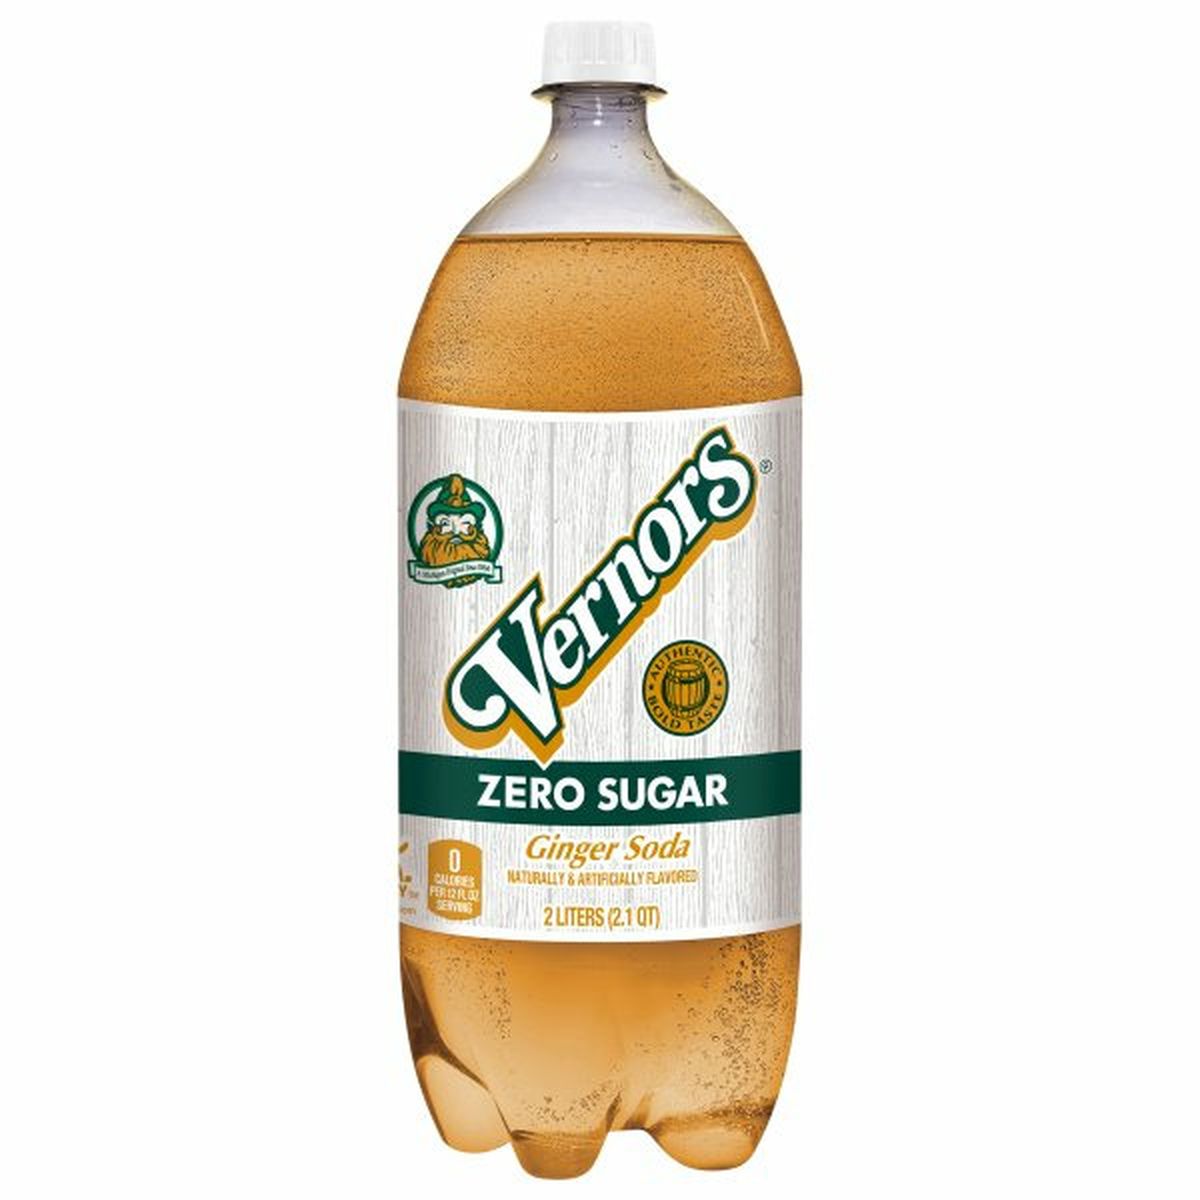 Calories in Diet Vernors Diet Vernors Ginger Soda Soda, Ginger, Diet